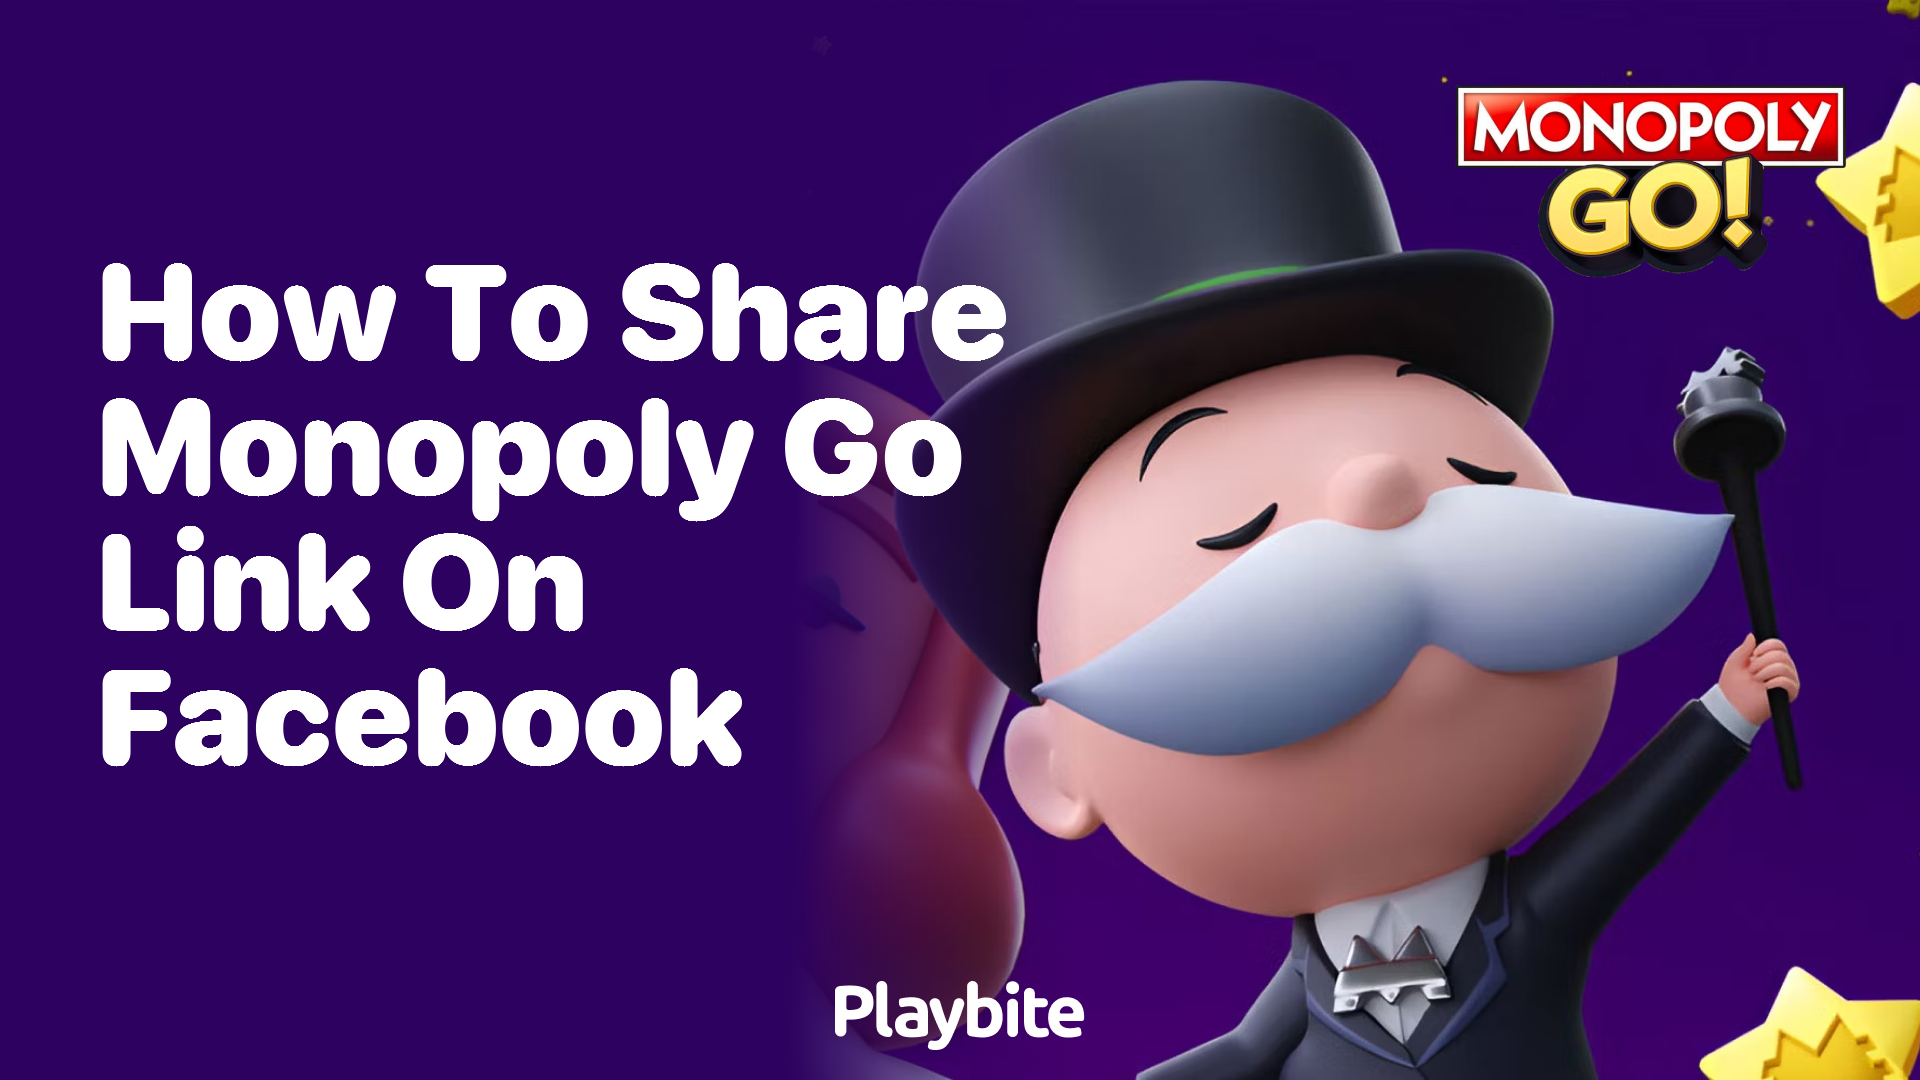 How to Share Your Monopoly Go Link on Facebook